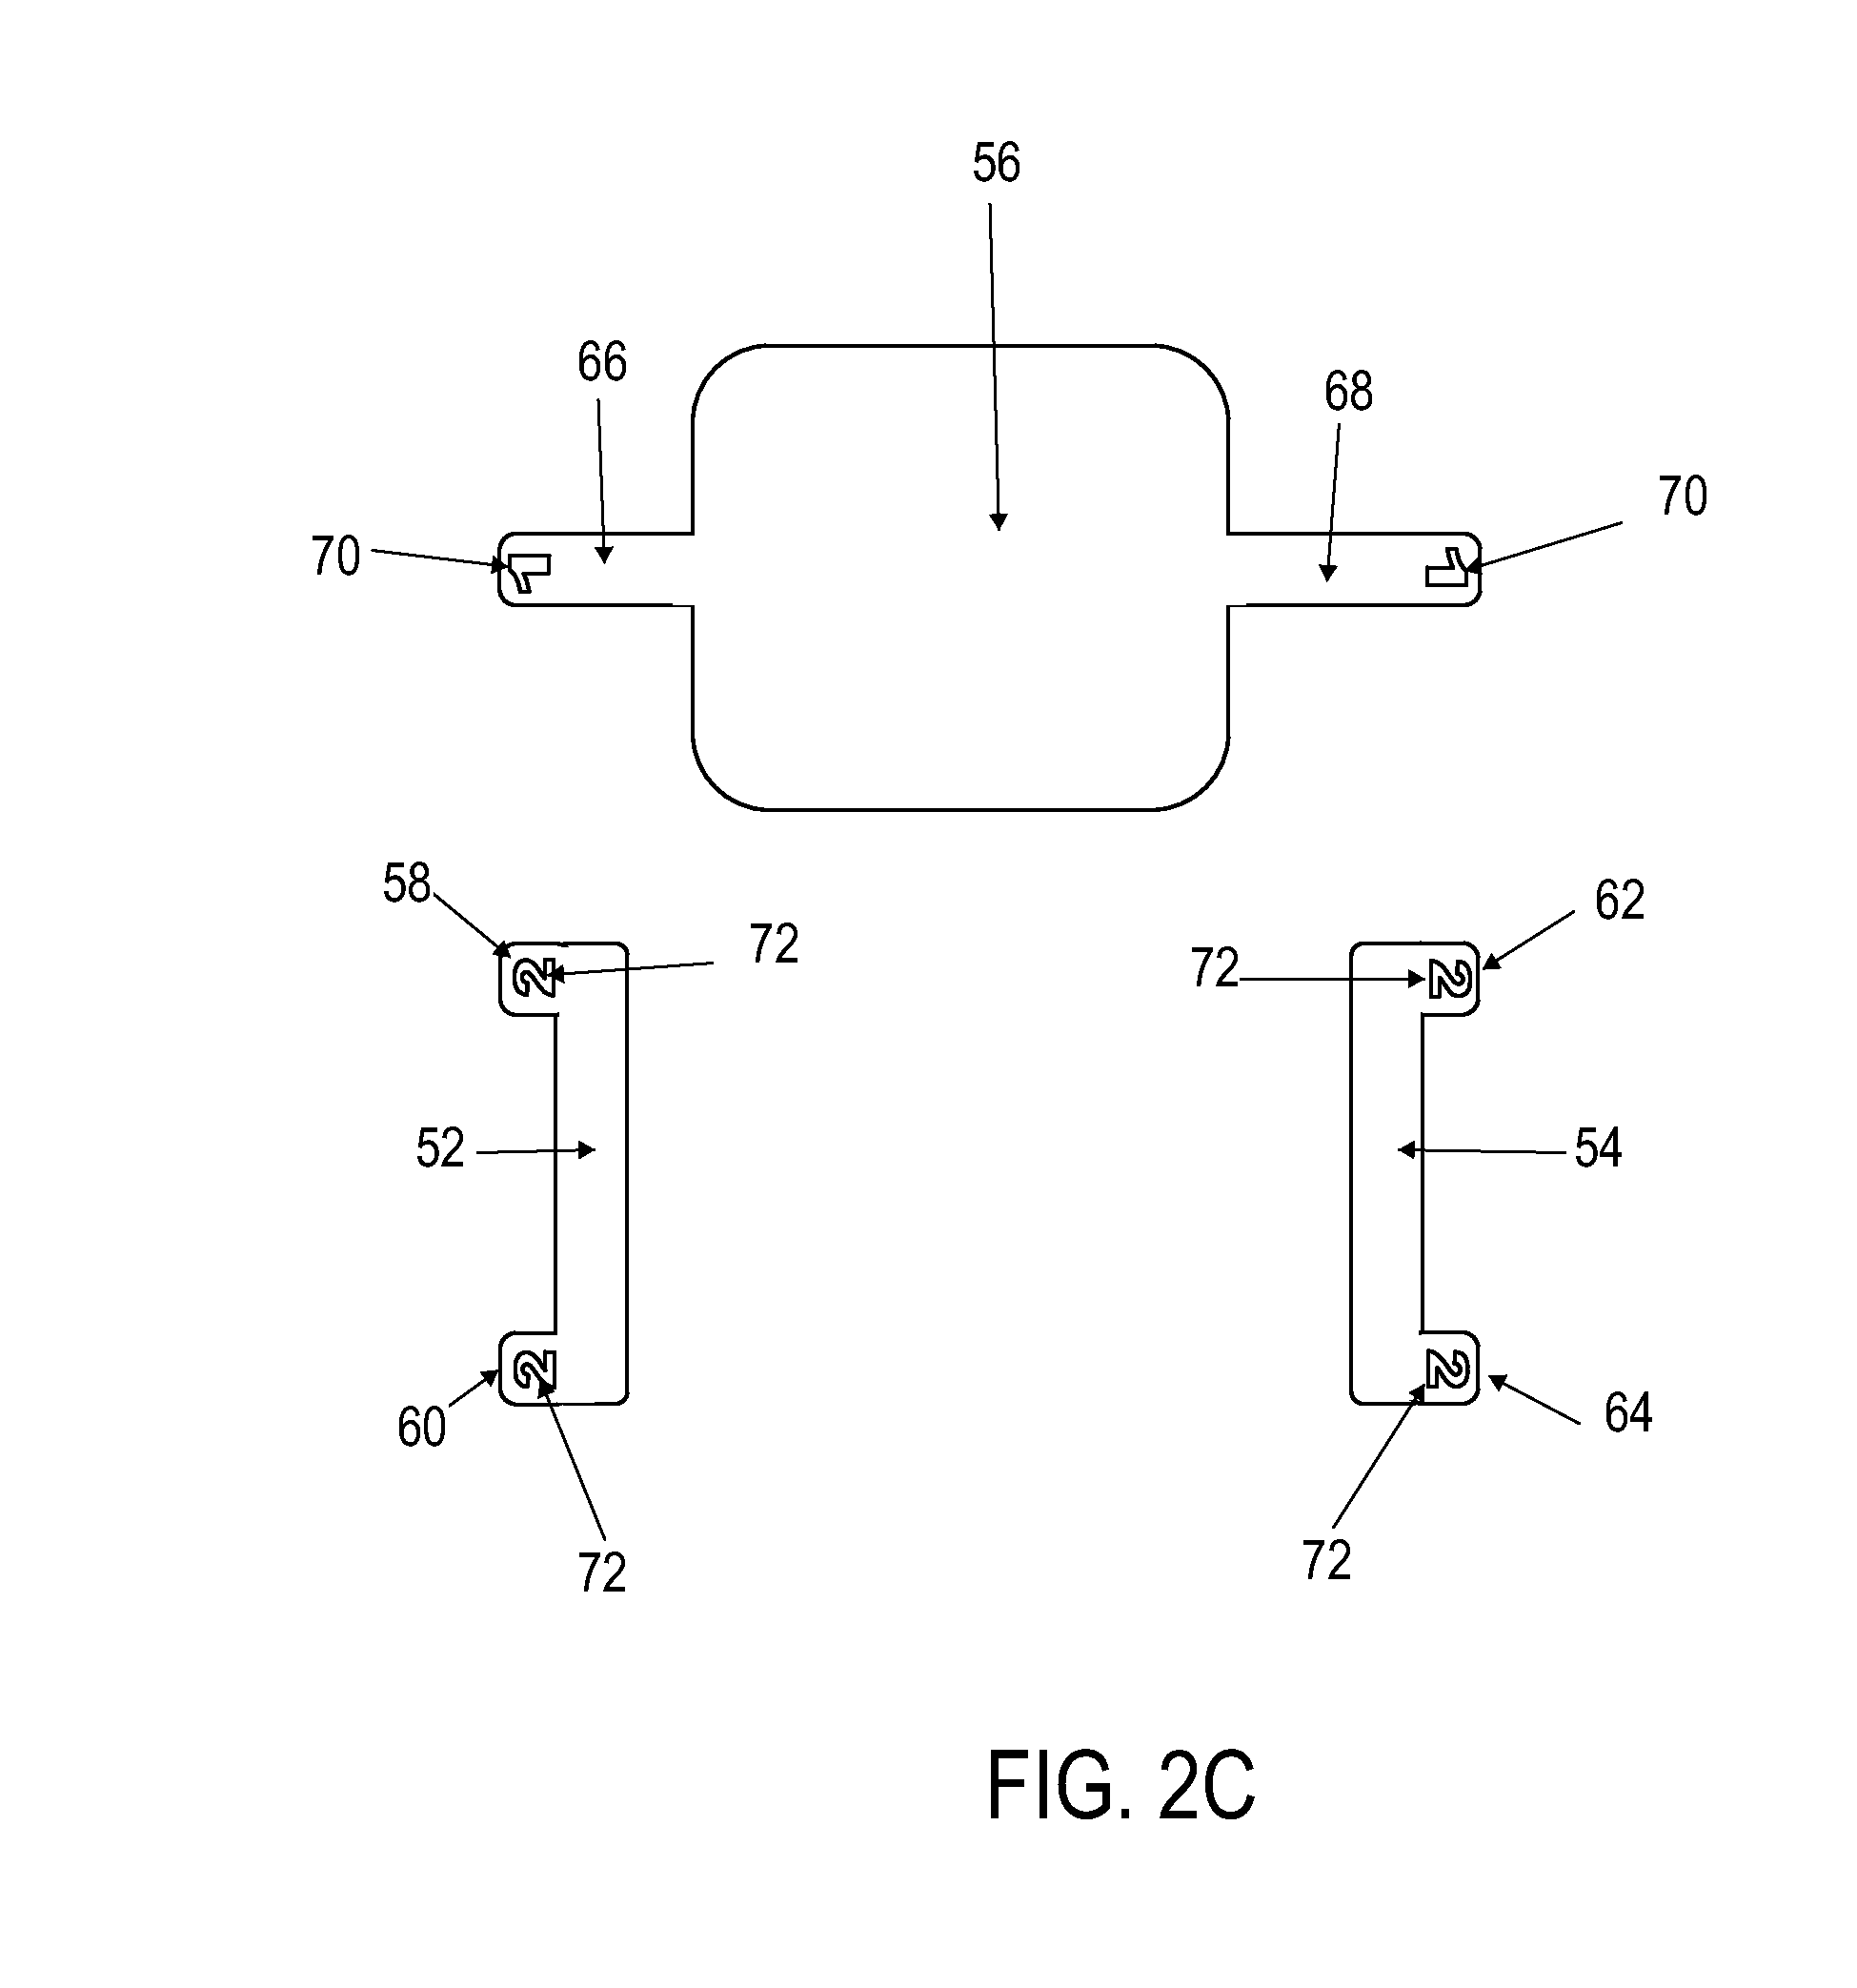 Radially tensioned wound or skin treatment devices and methods